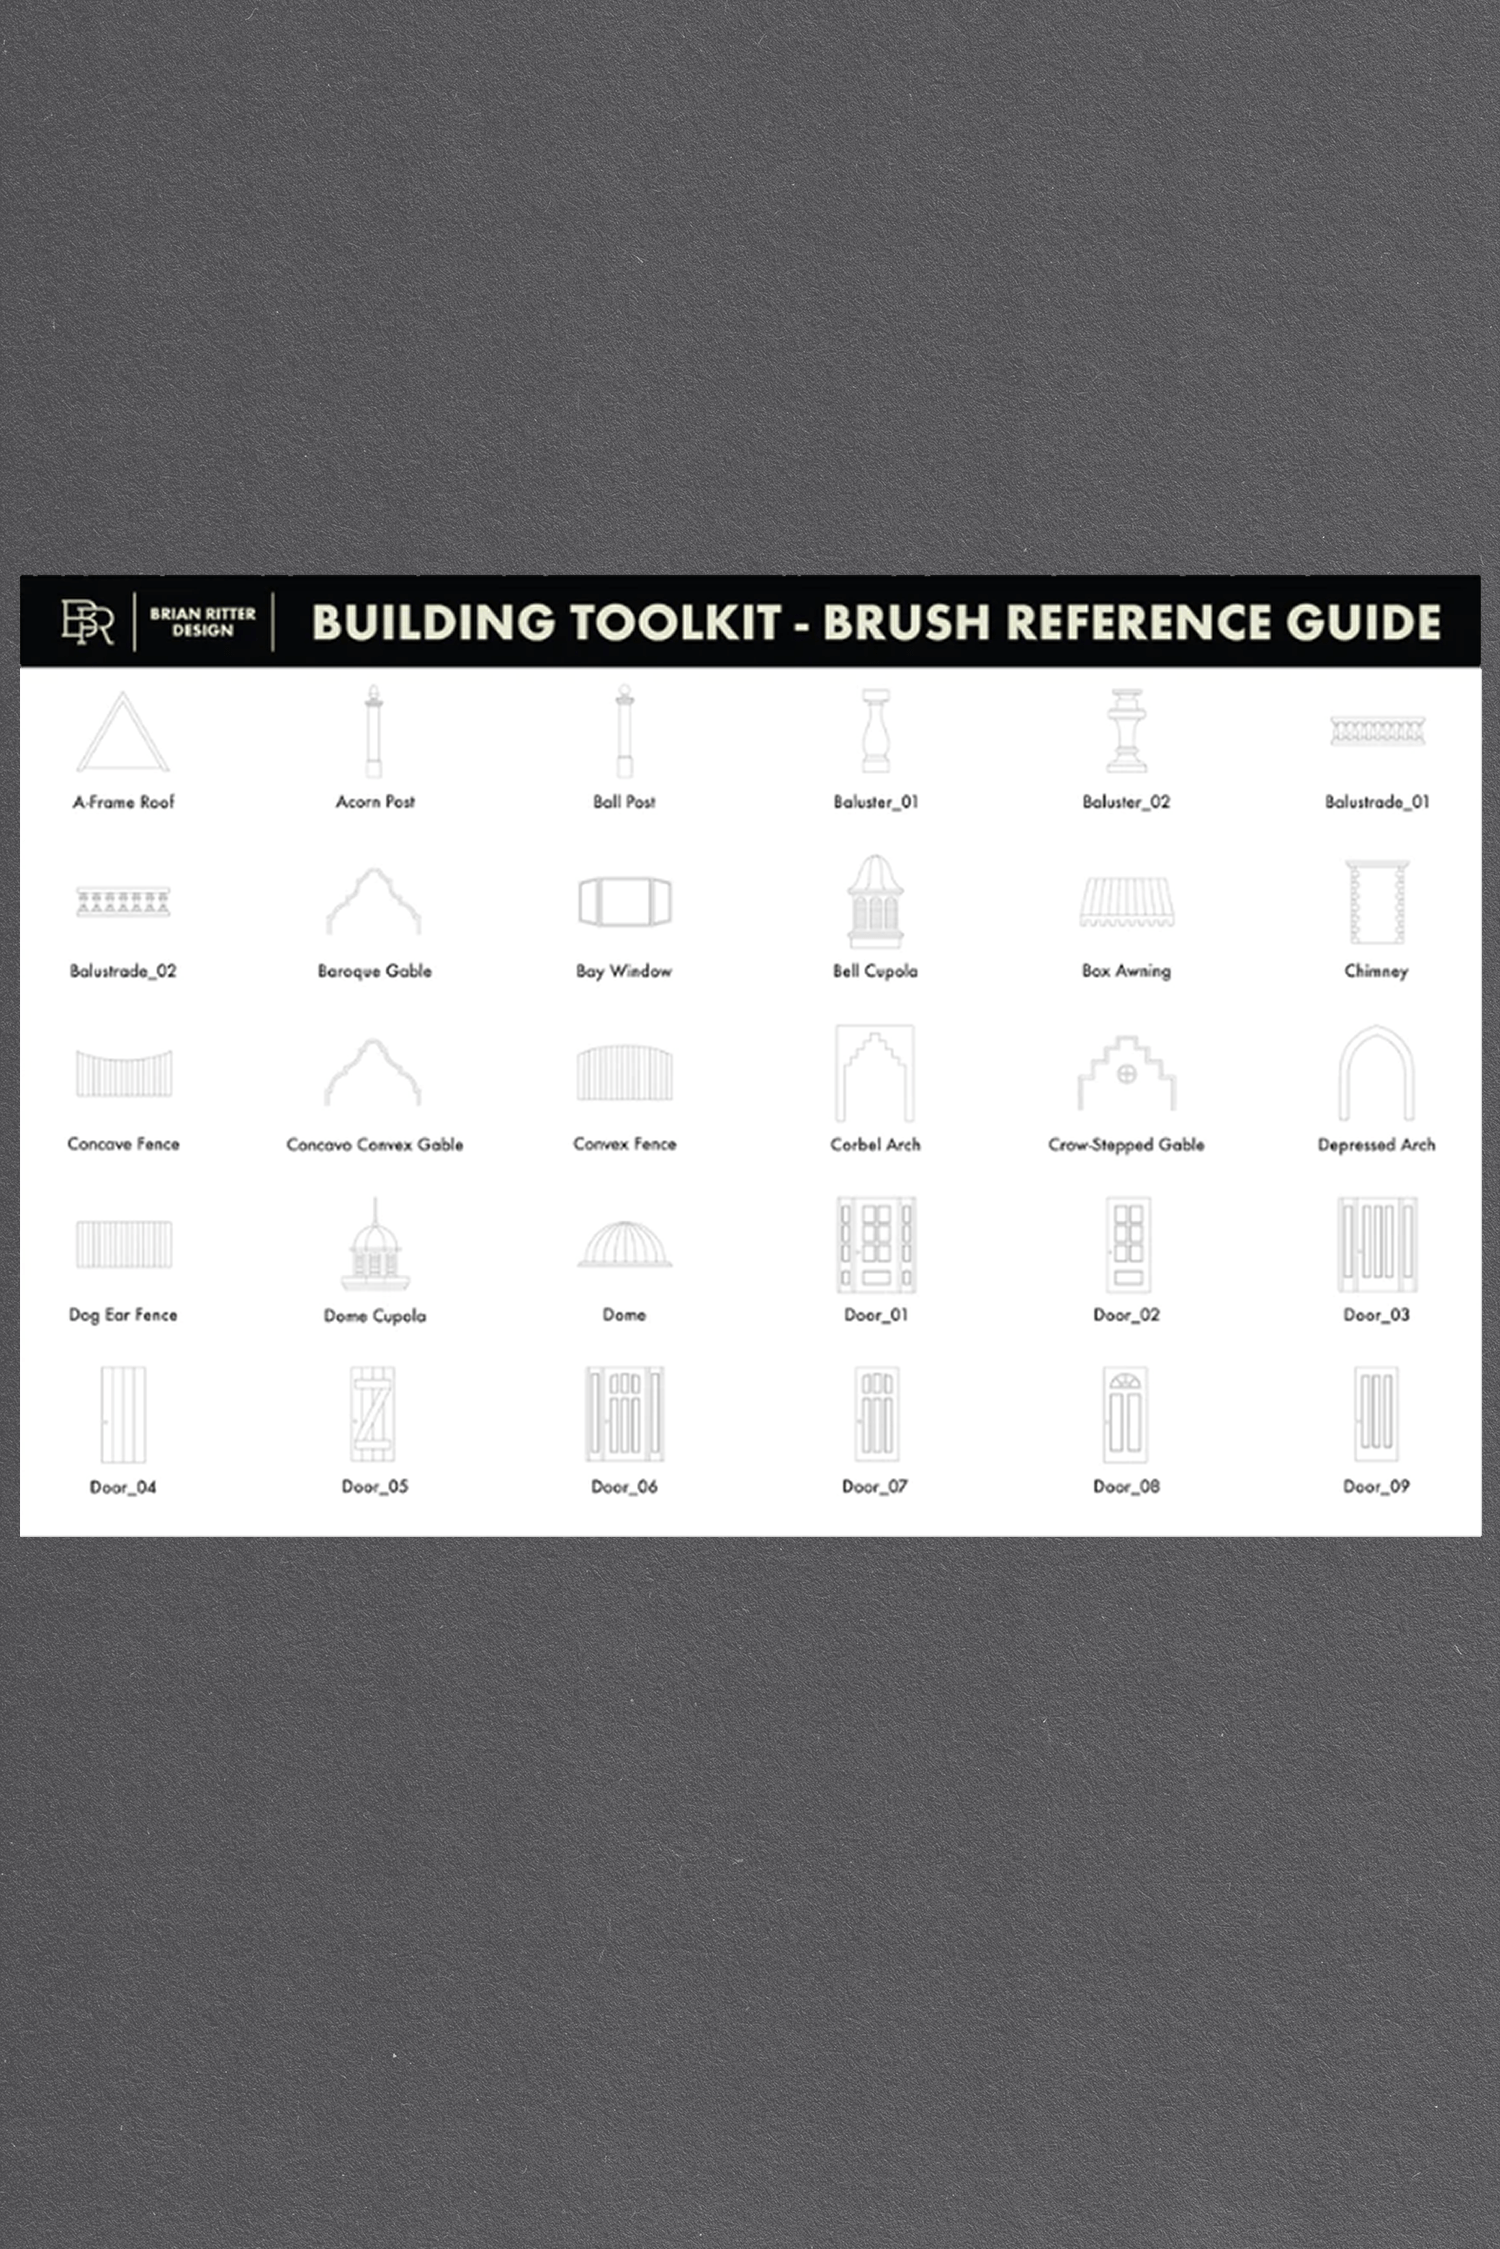 Buildings Toolkit by Brian Ritter Design